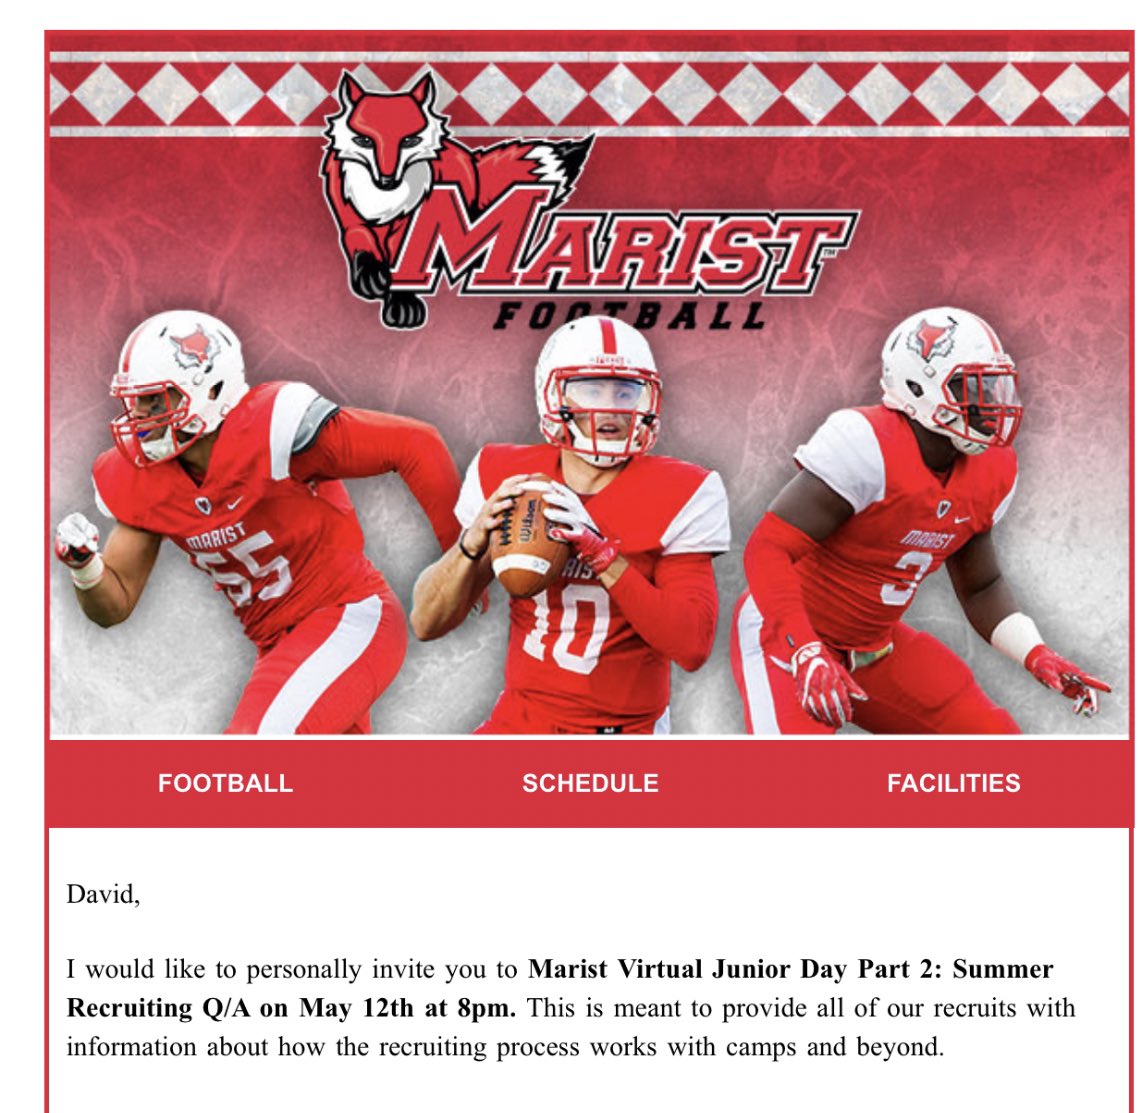 Big thank you to @CoachMWillis for the invite to the Virtual Junior Day at Marist! I can’t wait to learn more about the school and the program. @Marist_Fball @CNendick25 @Coach_Yos @CoachSco355 @CHSFootball100